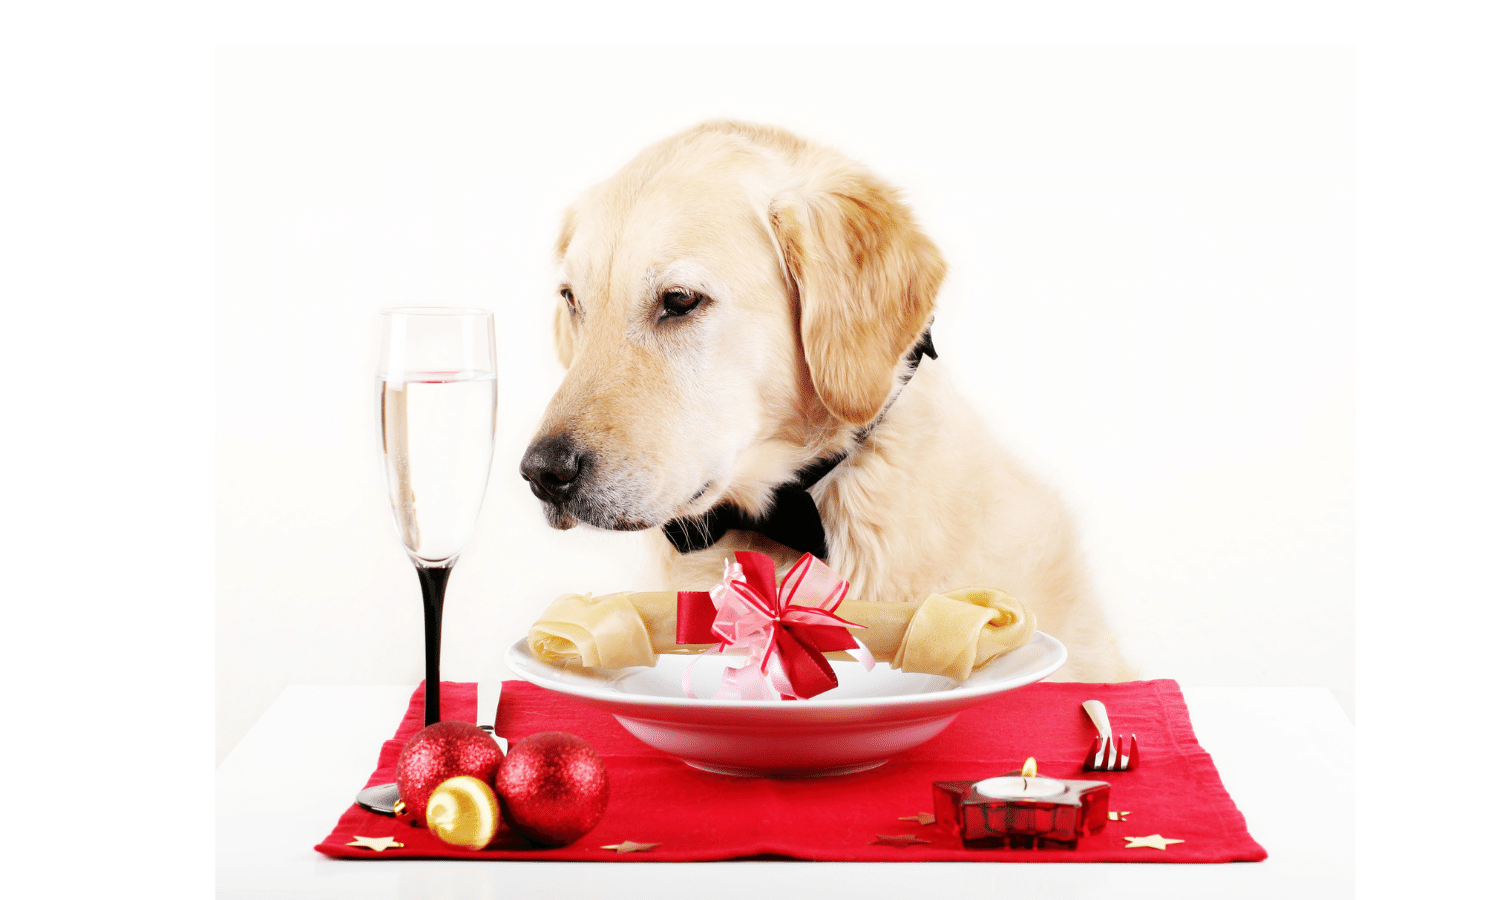 As we serve up a Christmas lunch for ourselves, don't forget about your four legged friend.